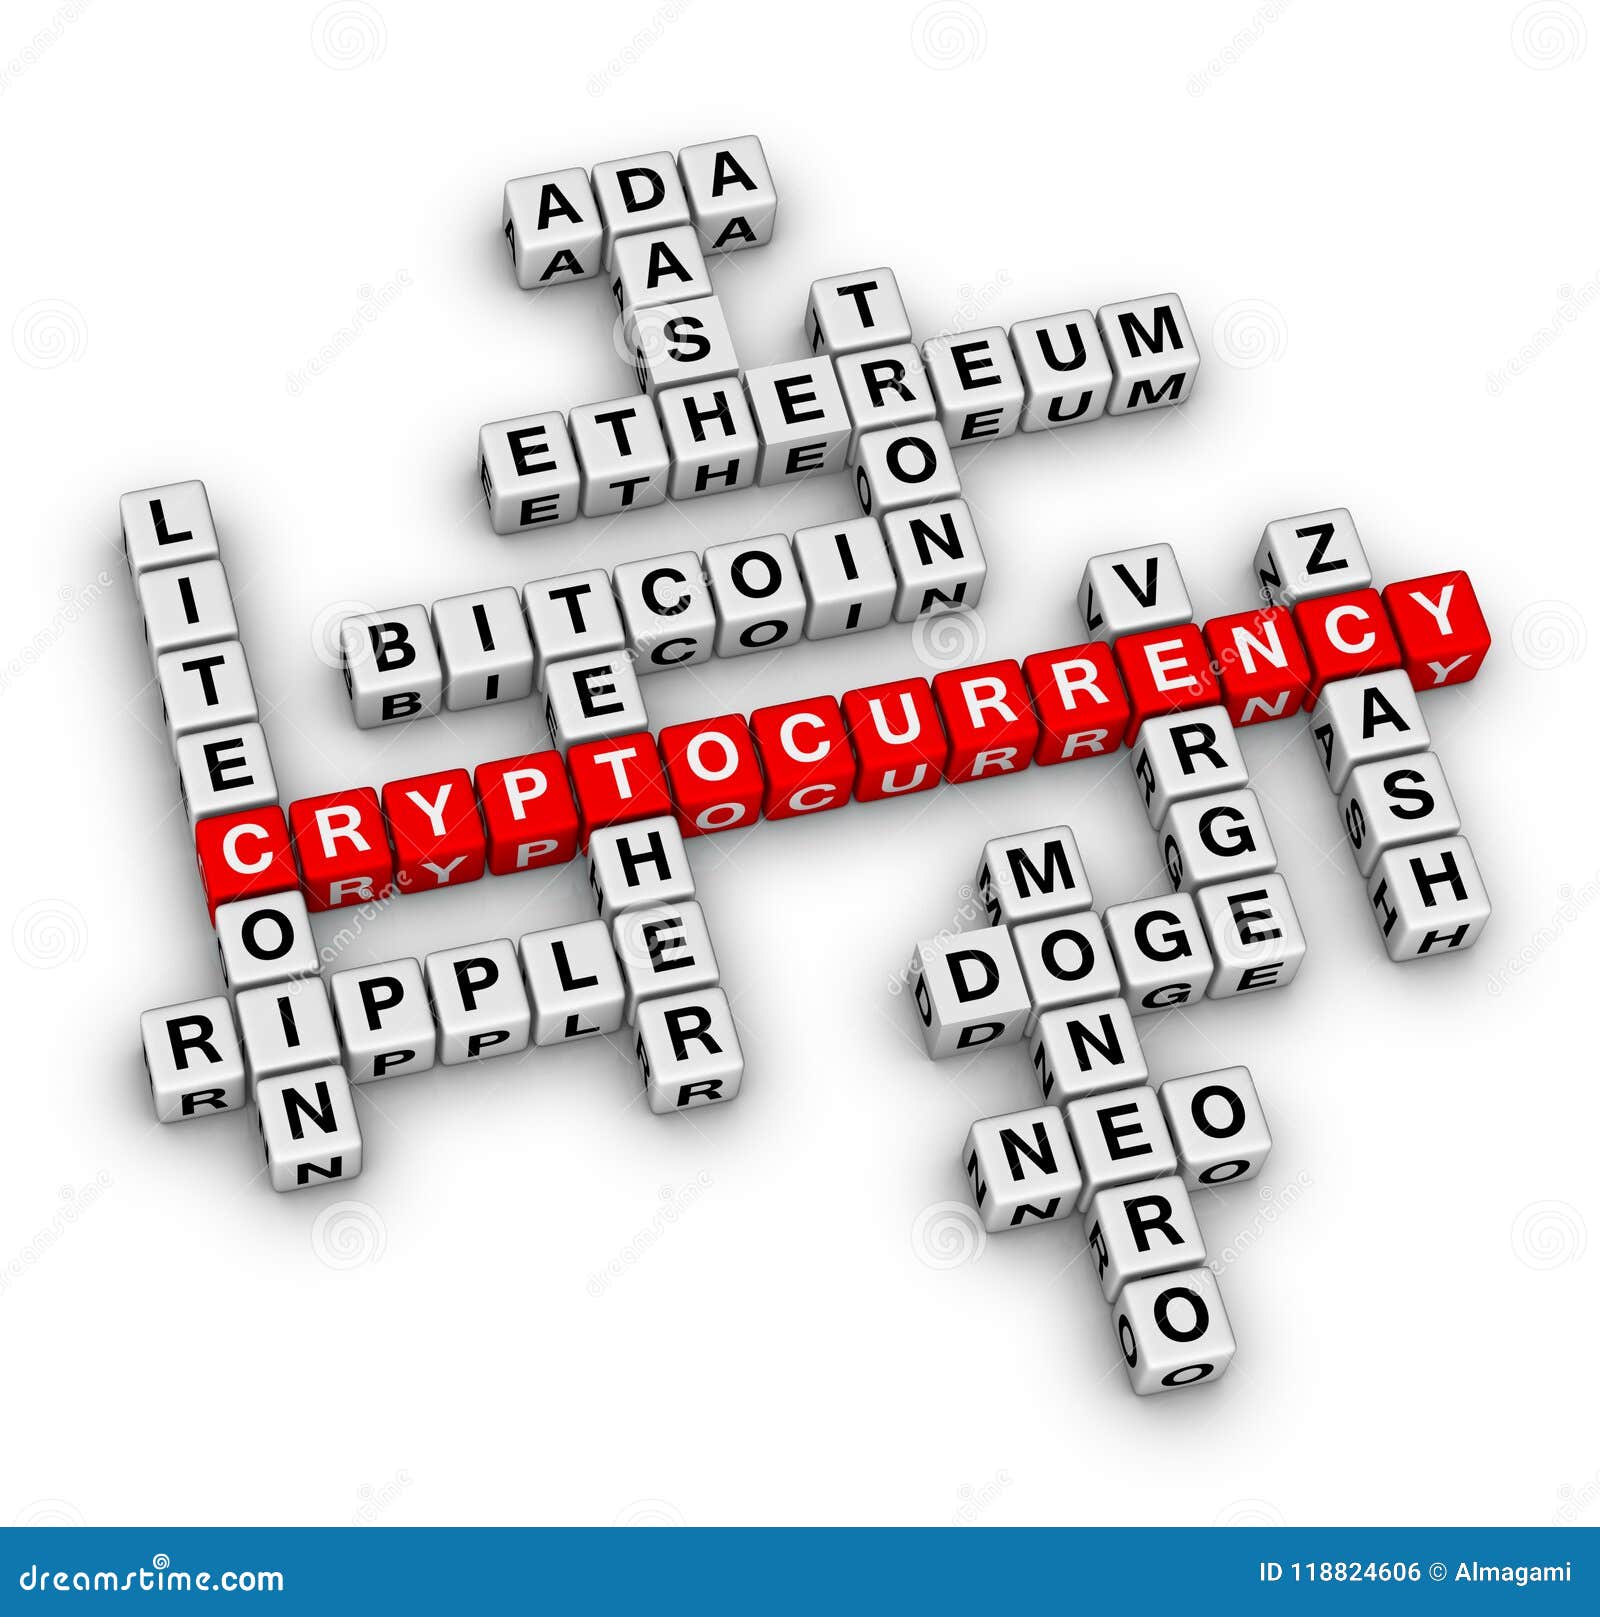 cryptocurrency difficulty explained further crossword